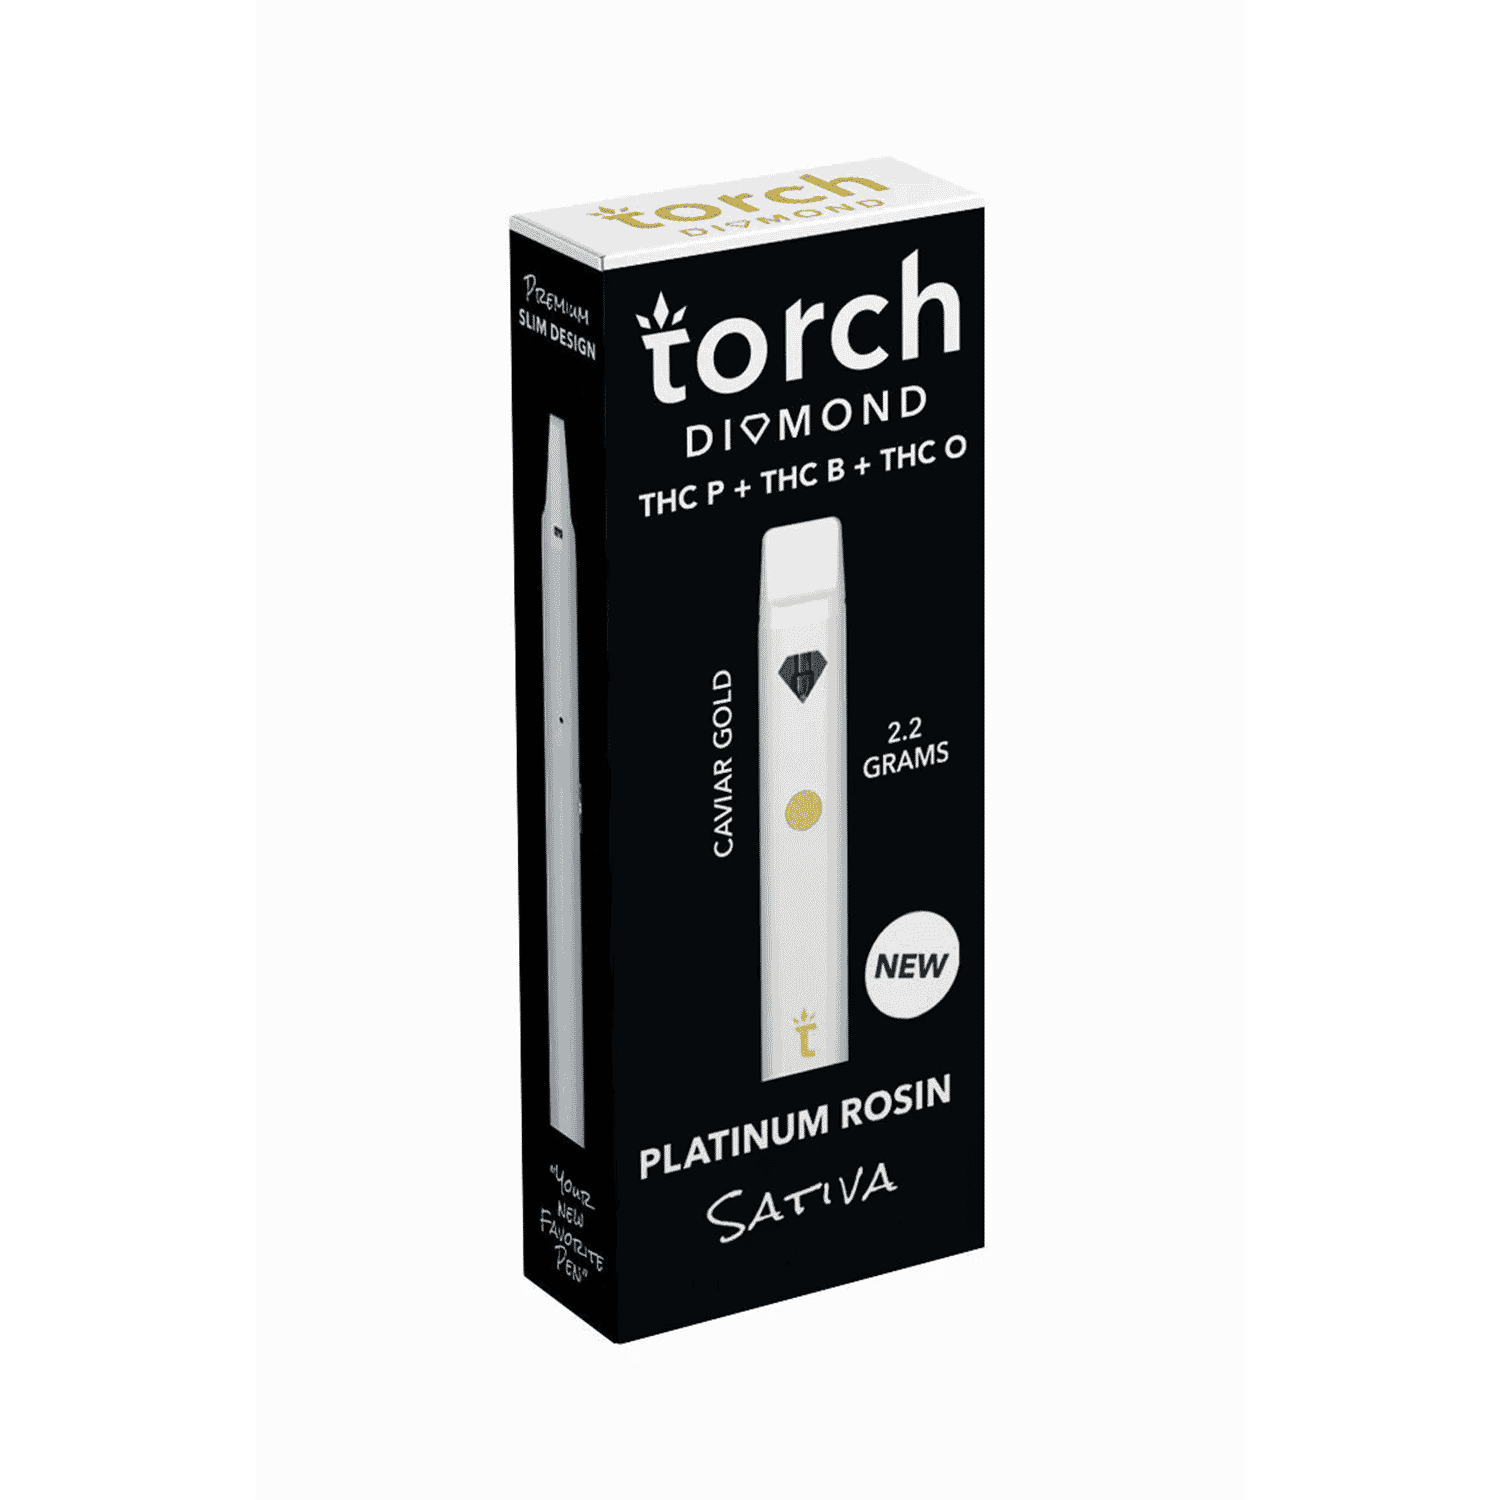 Torch Diamond Caviar Gold THC-O + Delta 8 + THCP + THCB Disposable (2.2g) Best Price